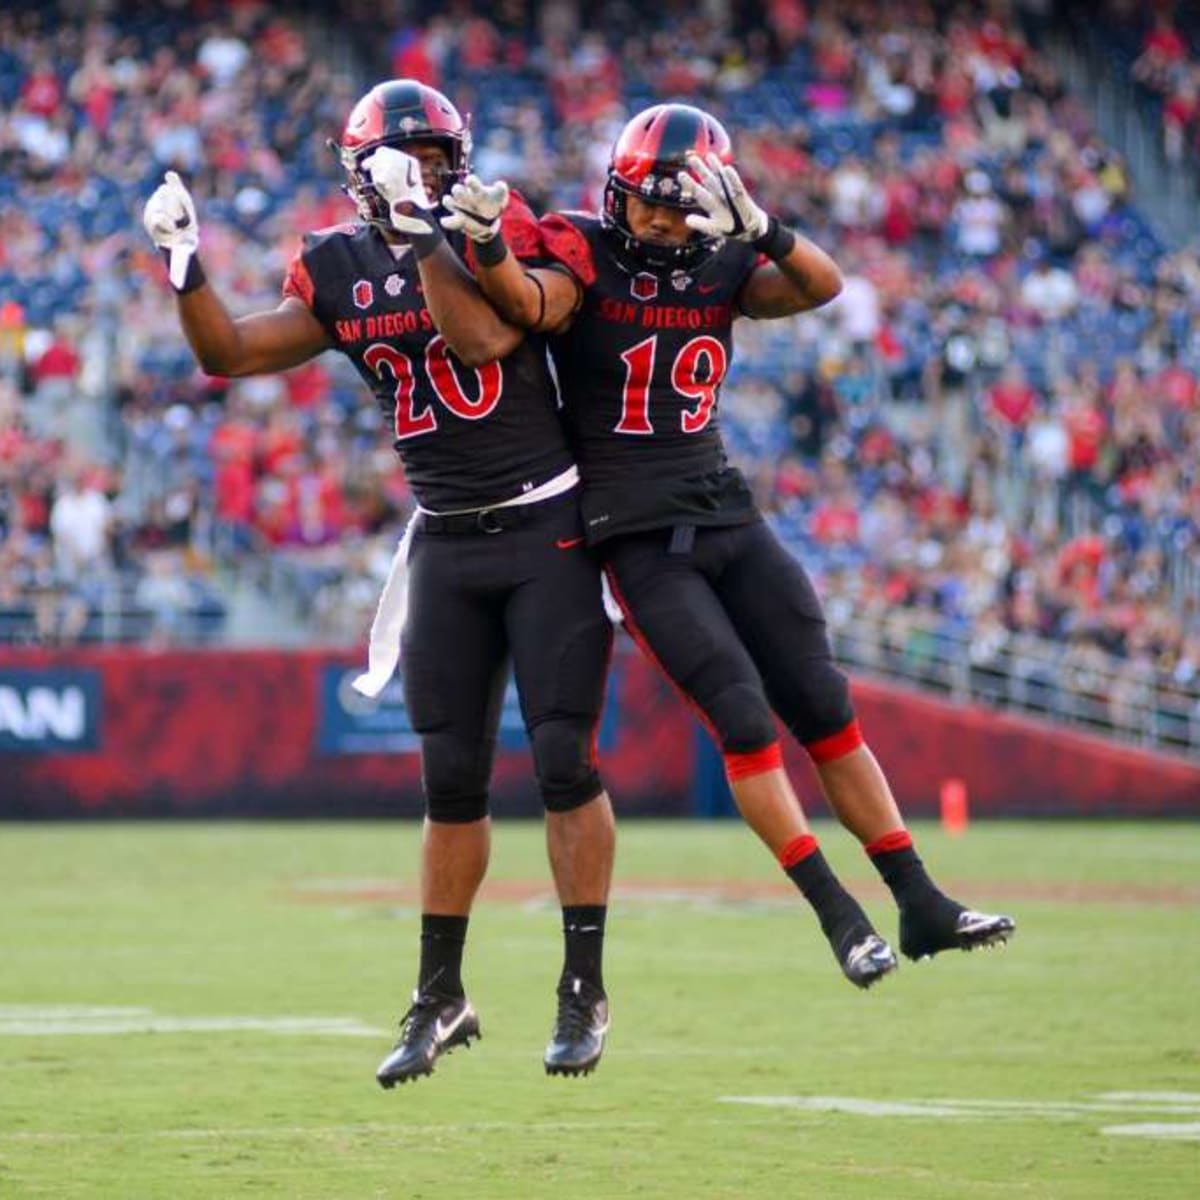 San Diego State to begin withdrawing from Mountain West - Footballscoop